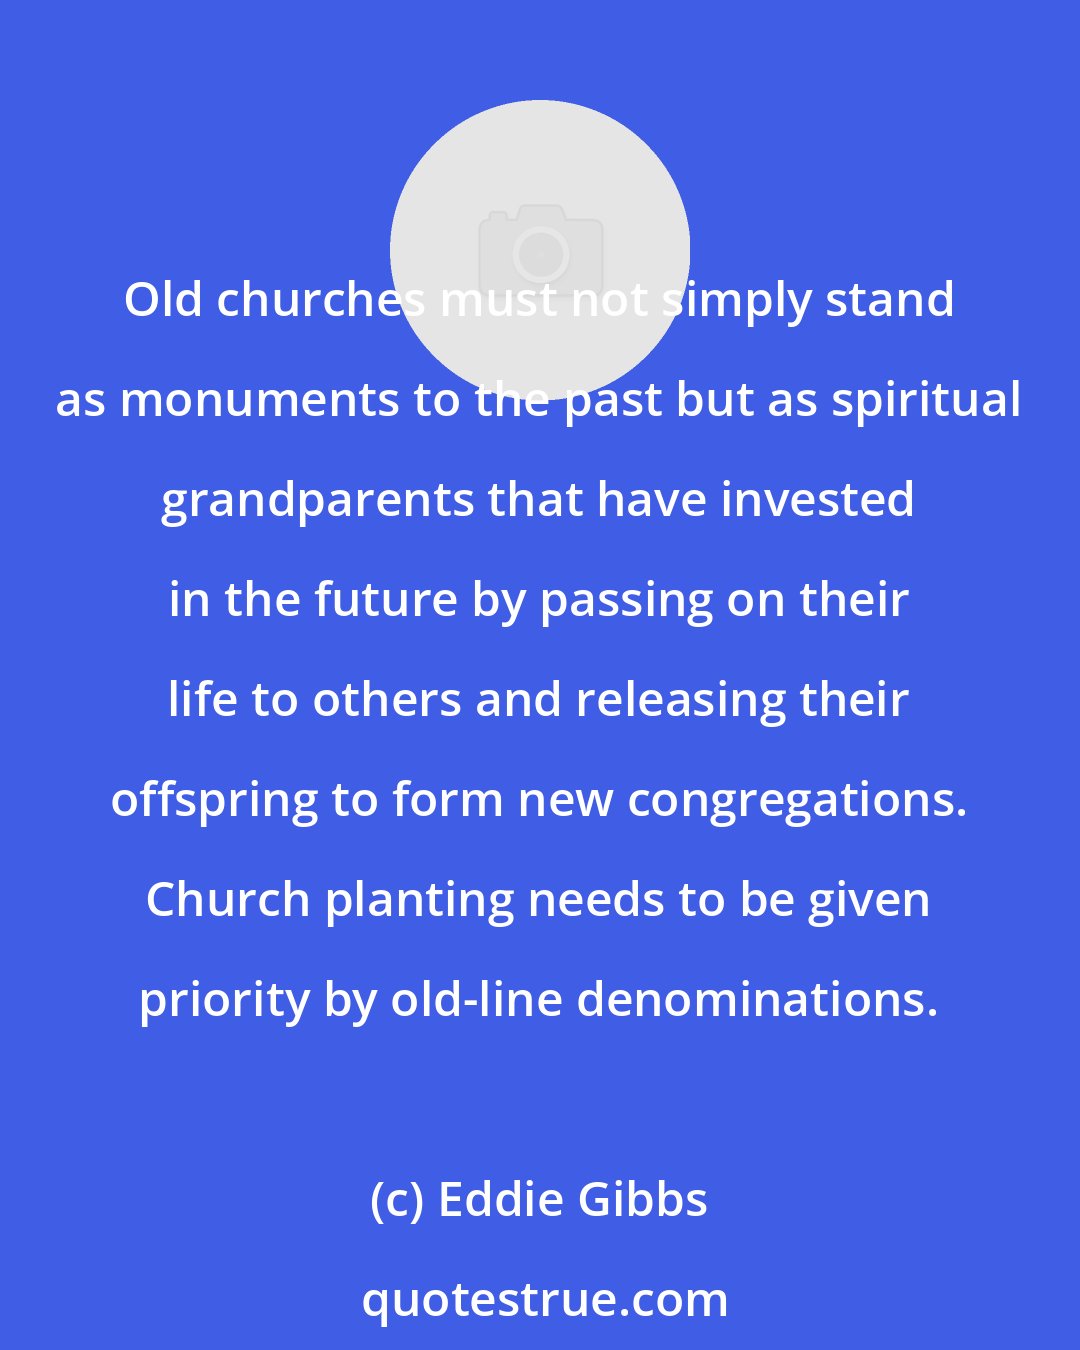 Eddie Gibbs: Old churches must not simply stand as monuments to the past but as spiritual grandparents that have invested in the future by passing on their life to others and releasing their offspring to form new congregations. Church planting needs to be given priority by old-line denominations.